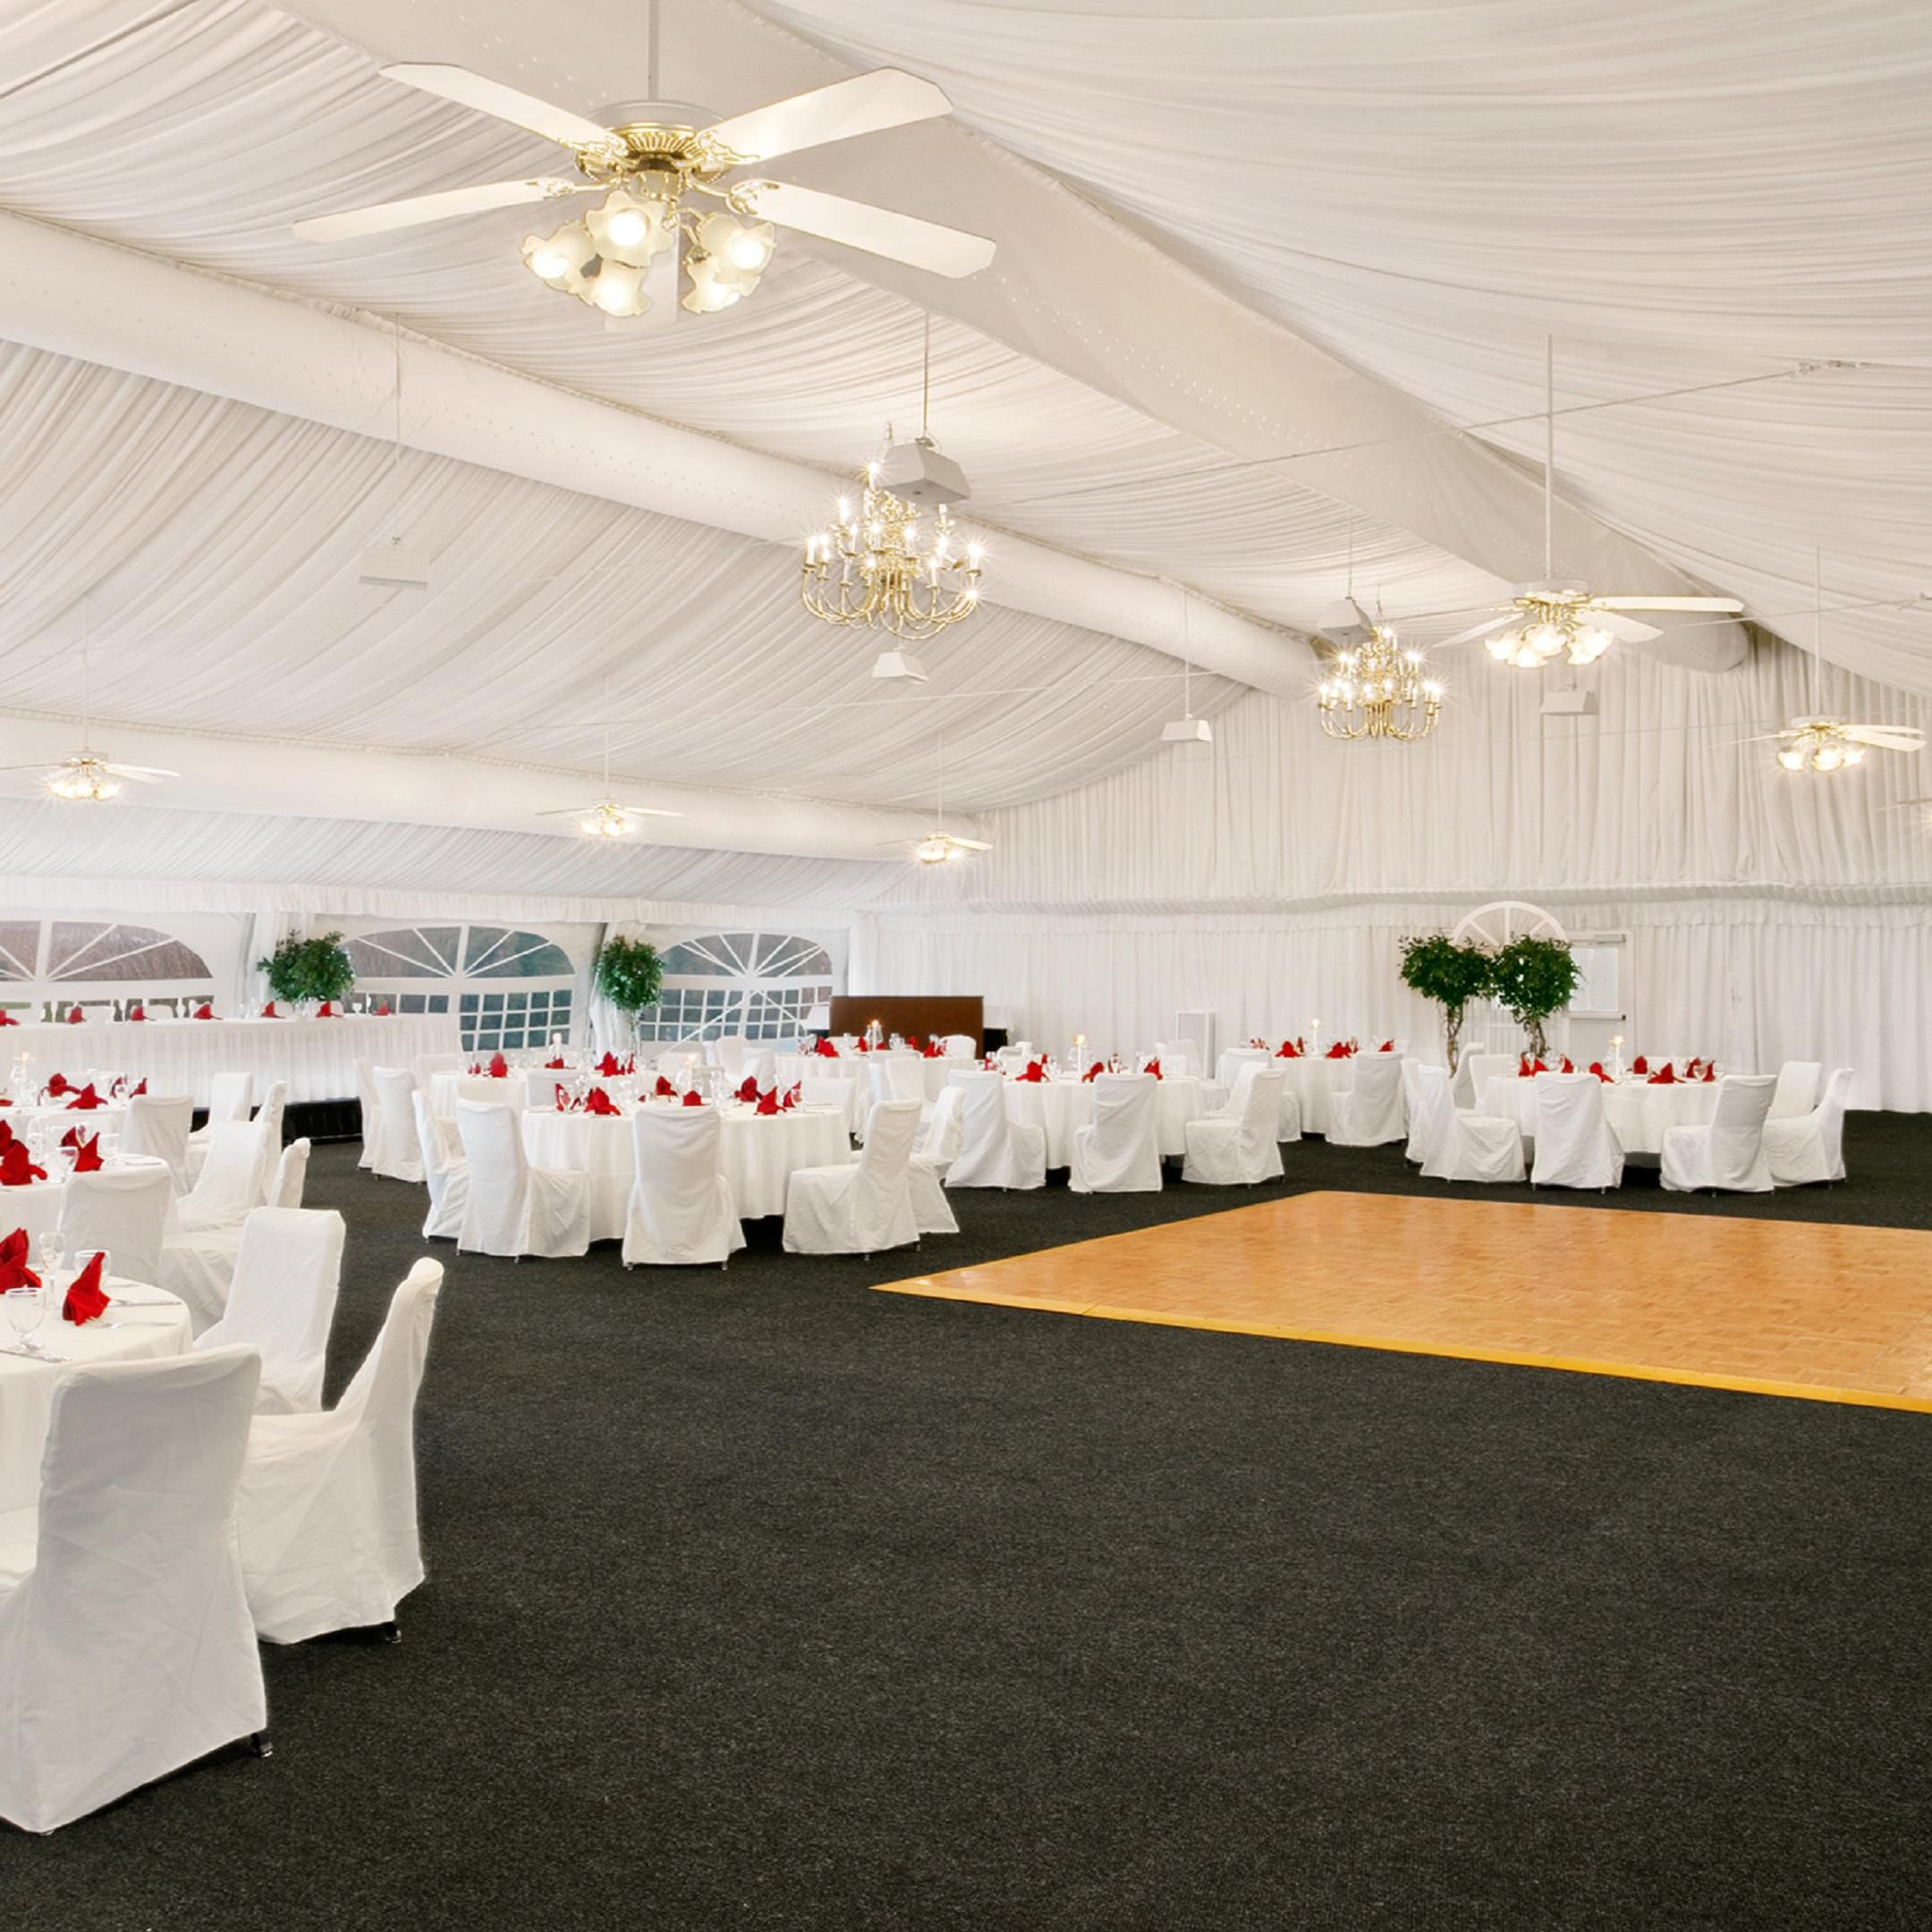 The Grand Pavilion - perfect for weddings or any social event!